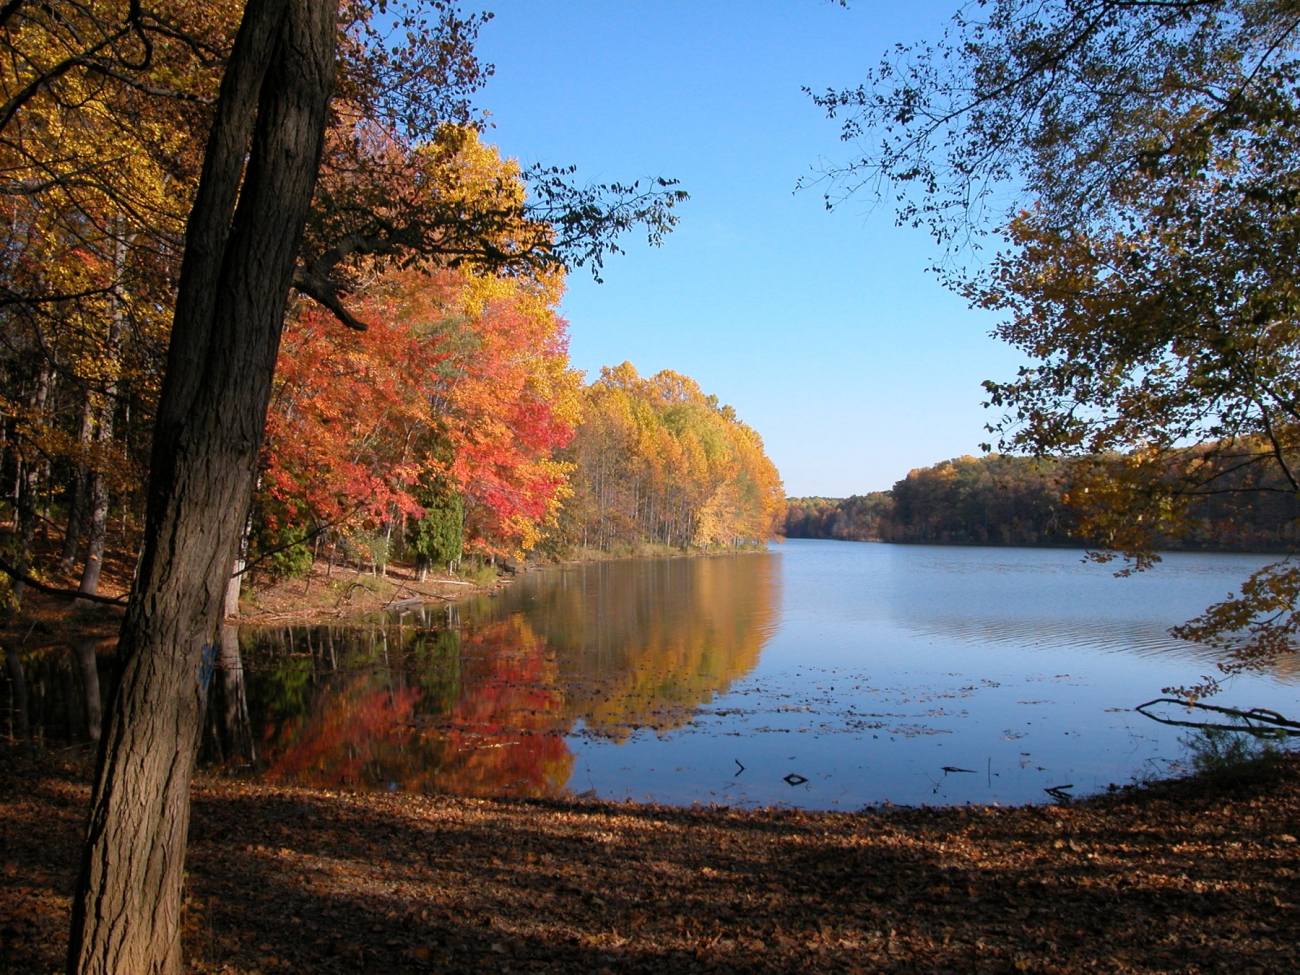 A quiet cove on Clopper Lake on an autumn afternoon